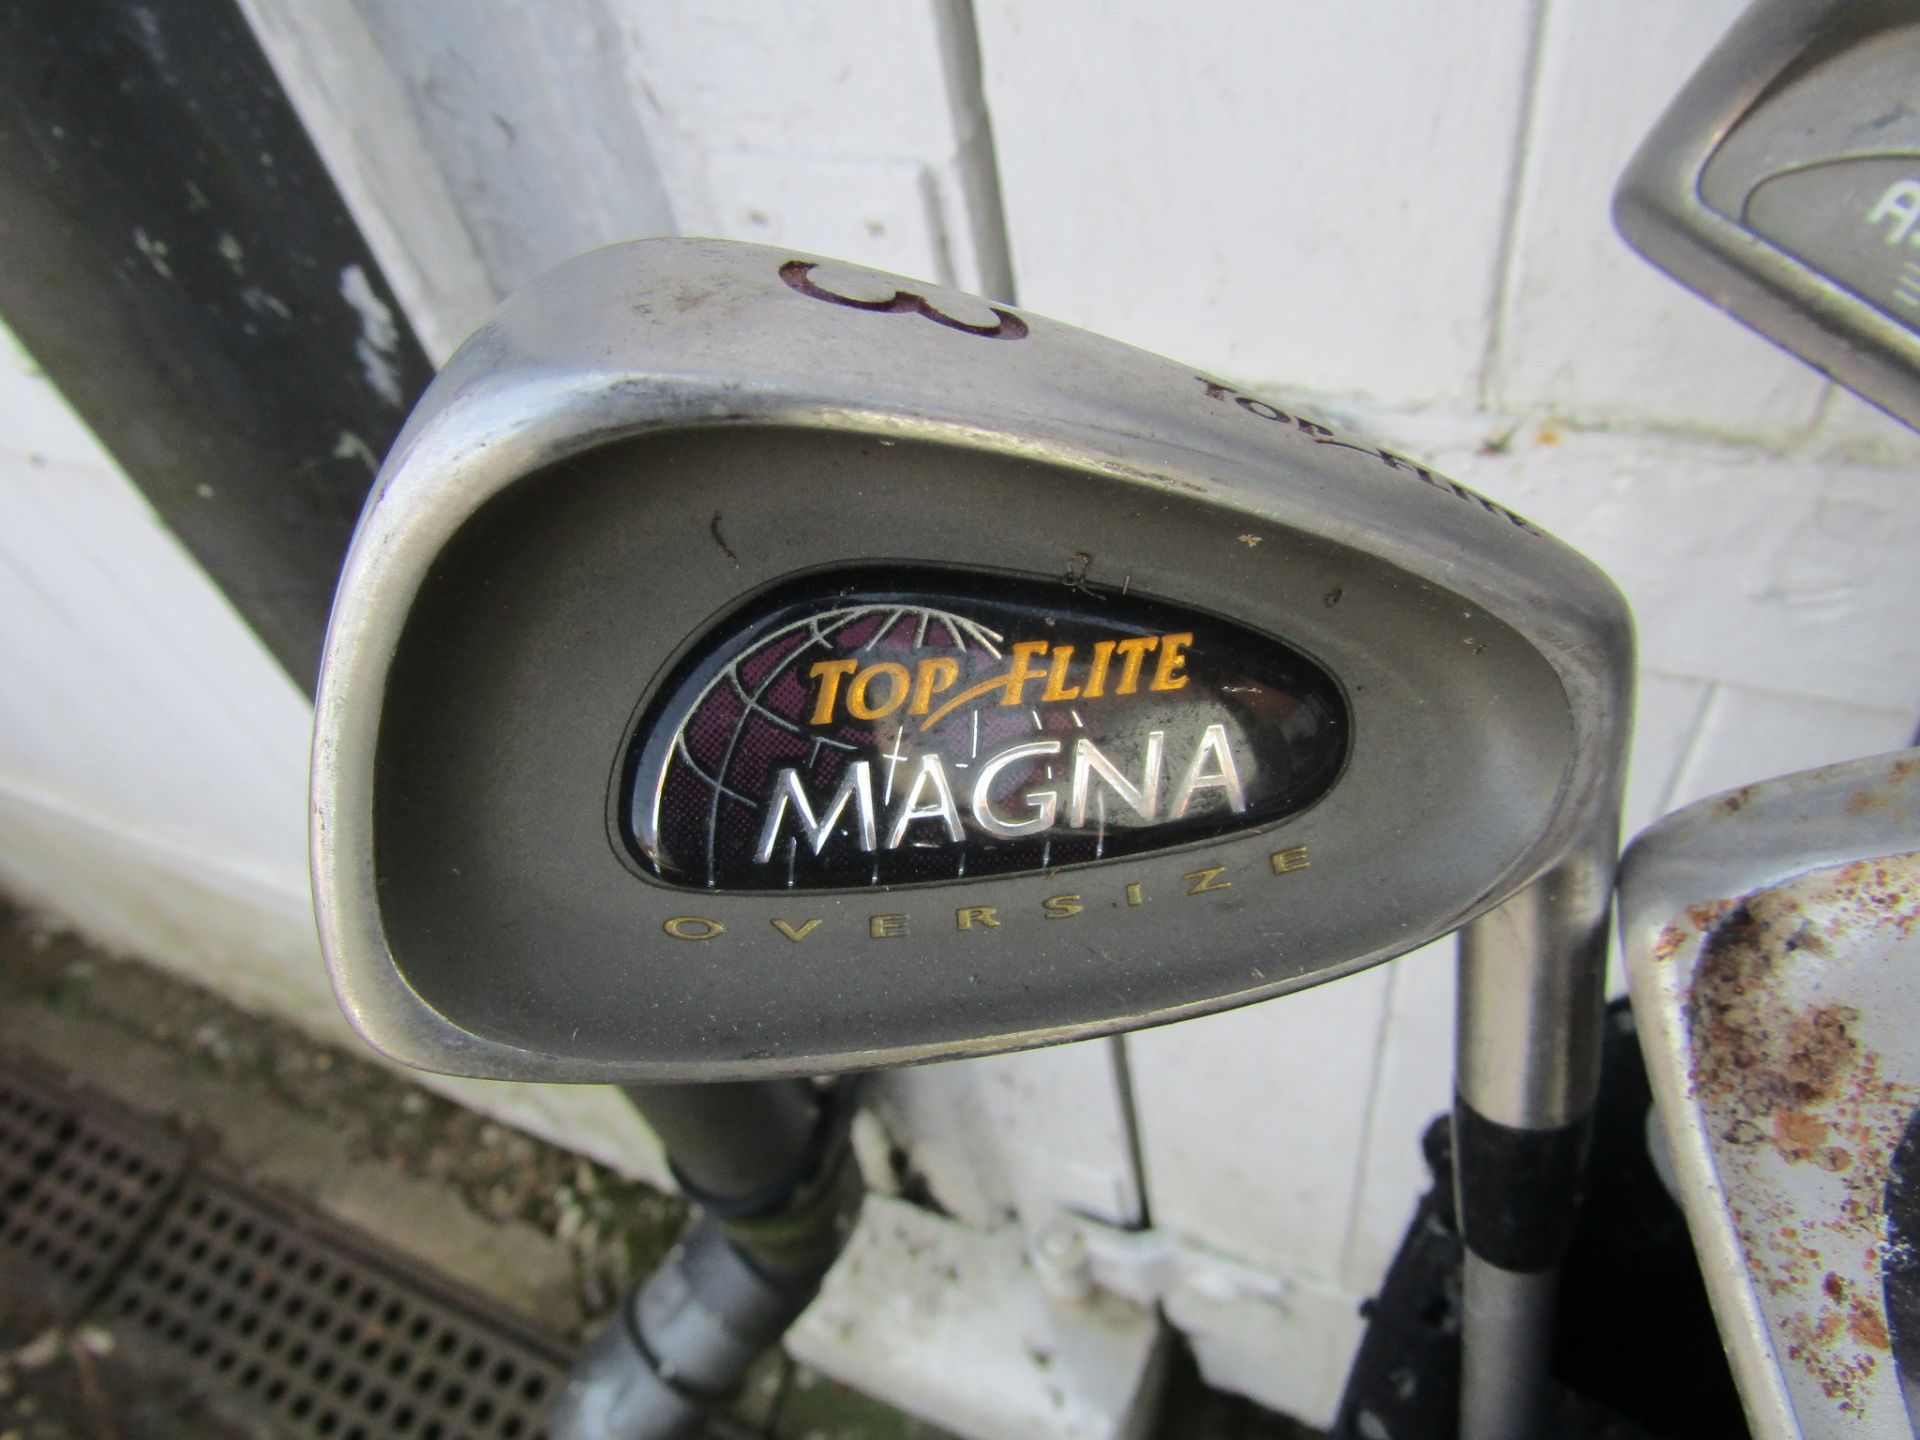 Golf clubs to include Top Flight and hippo in 2 golf bags - Image 4 of 8